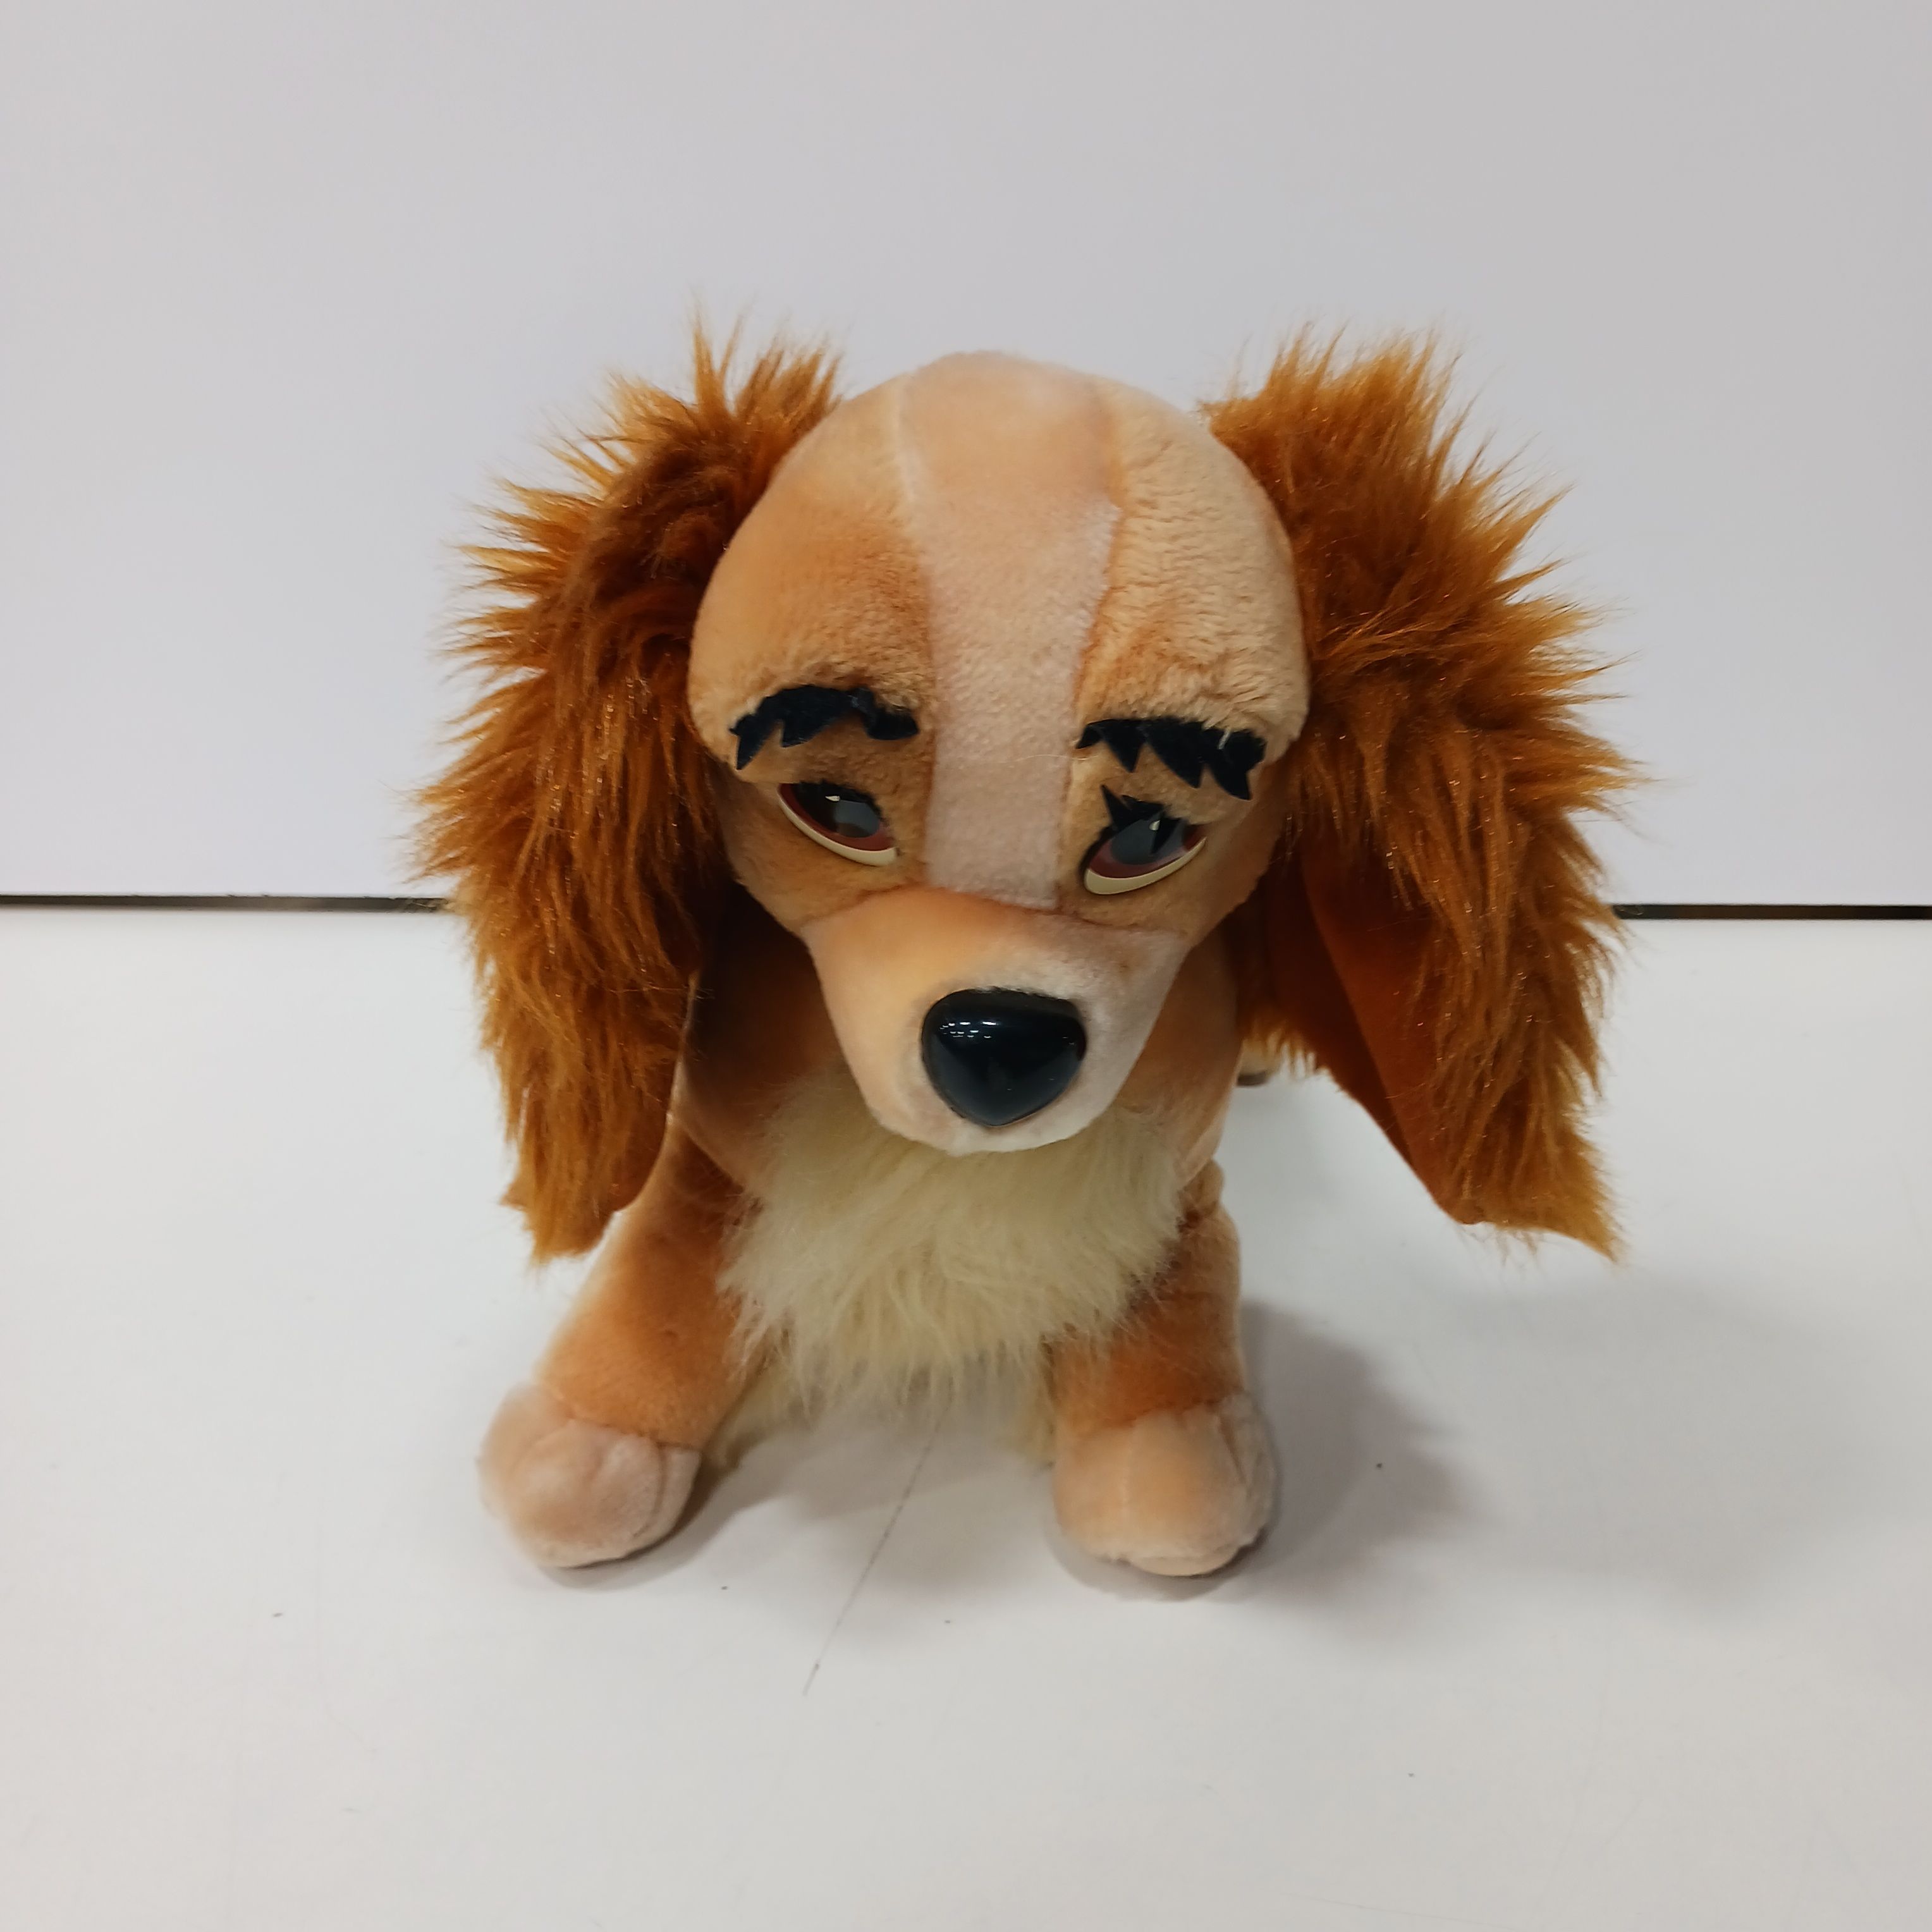 Disney Store Lady Plush Lady and the Tramp 14 Stuffed Animal Plush Toy  Vintage for Kids 